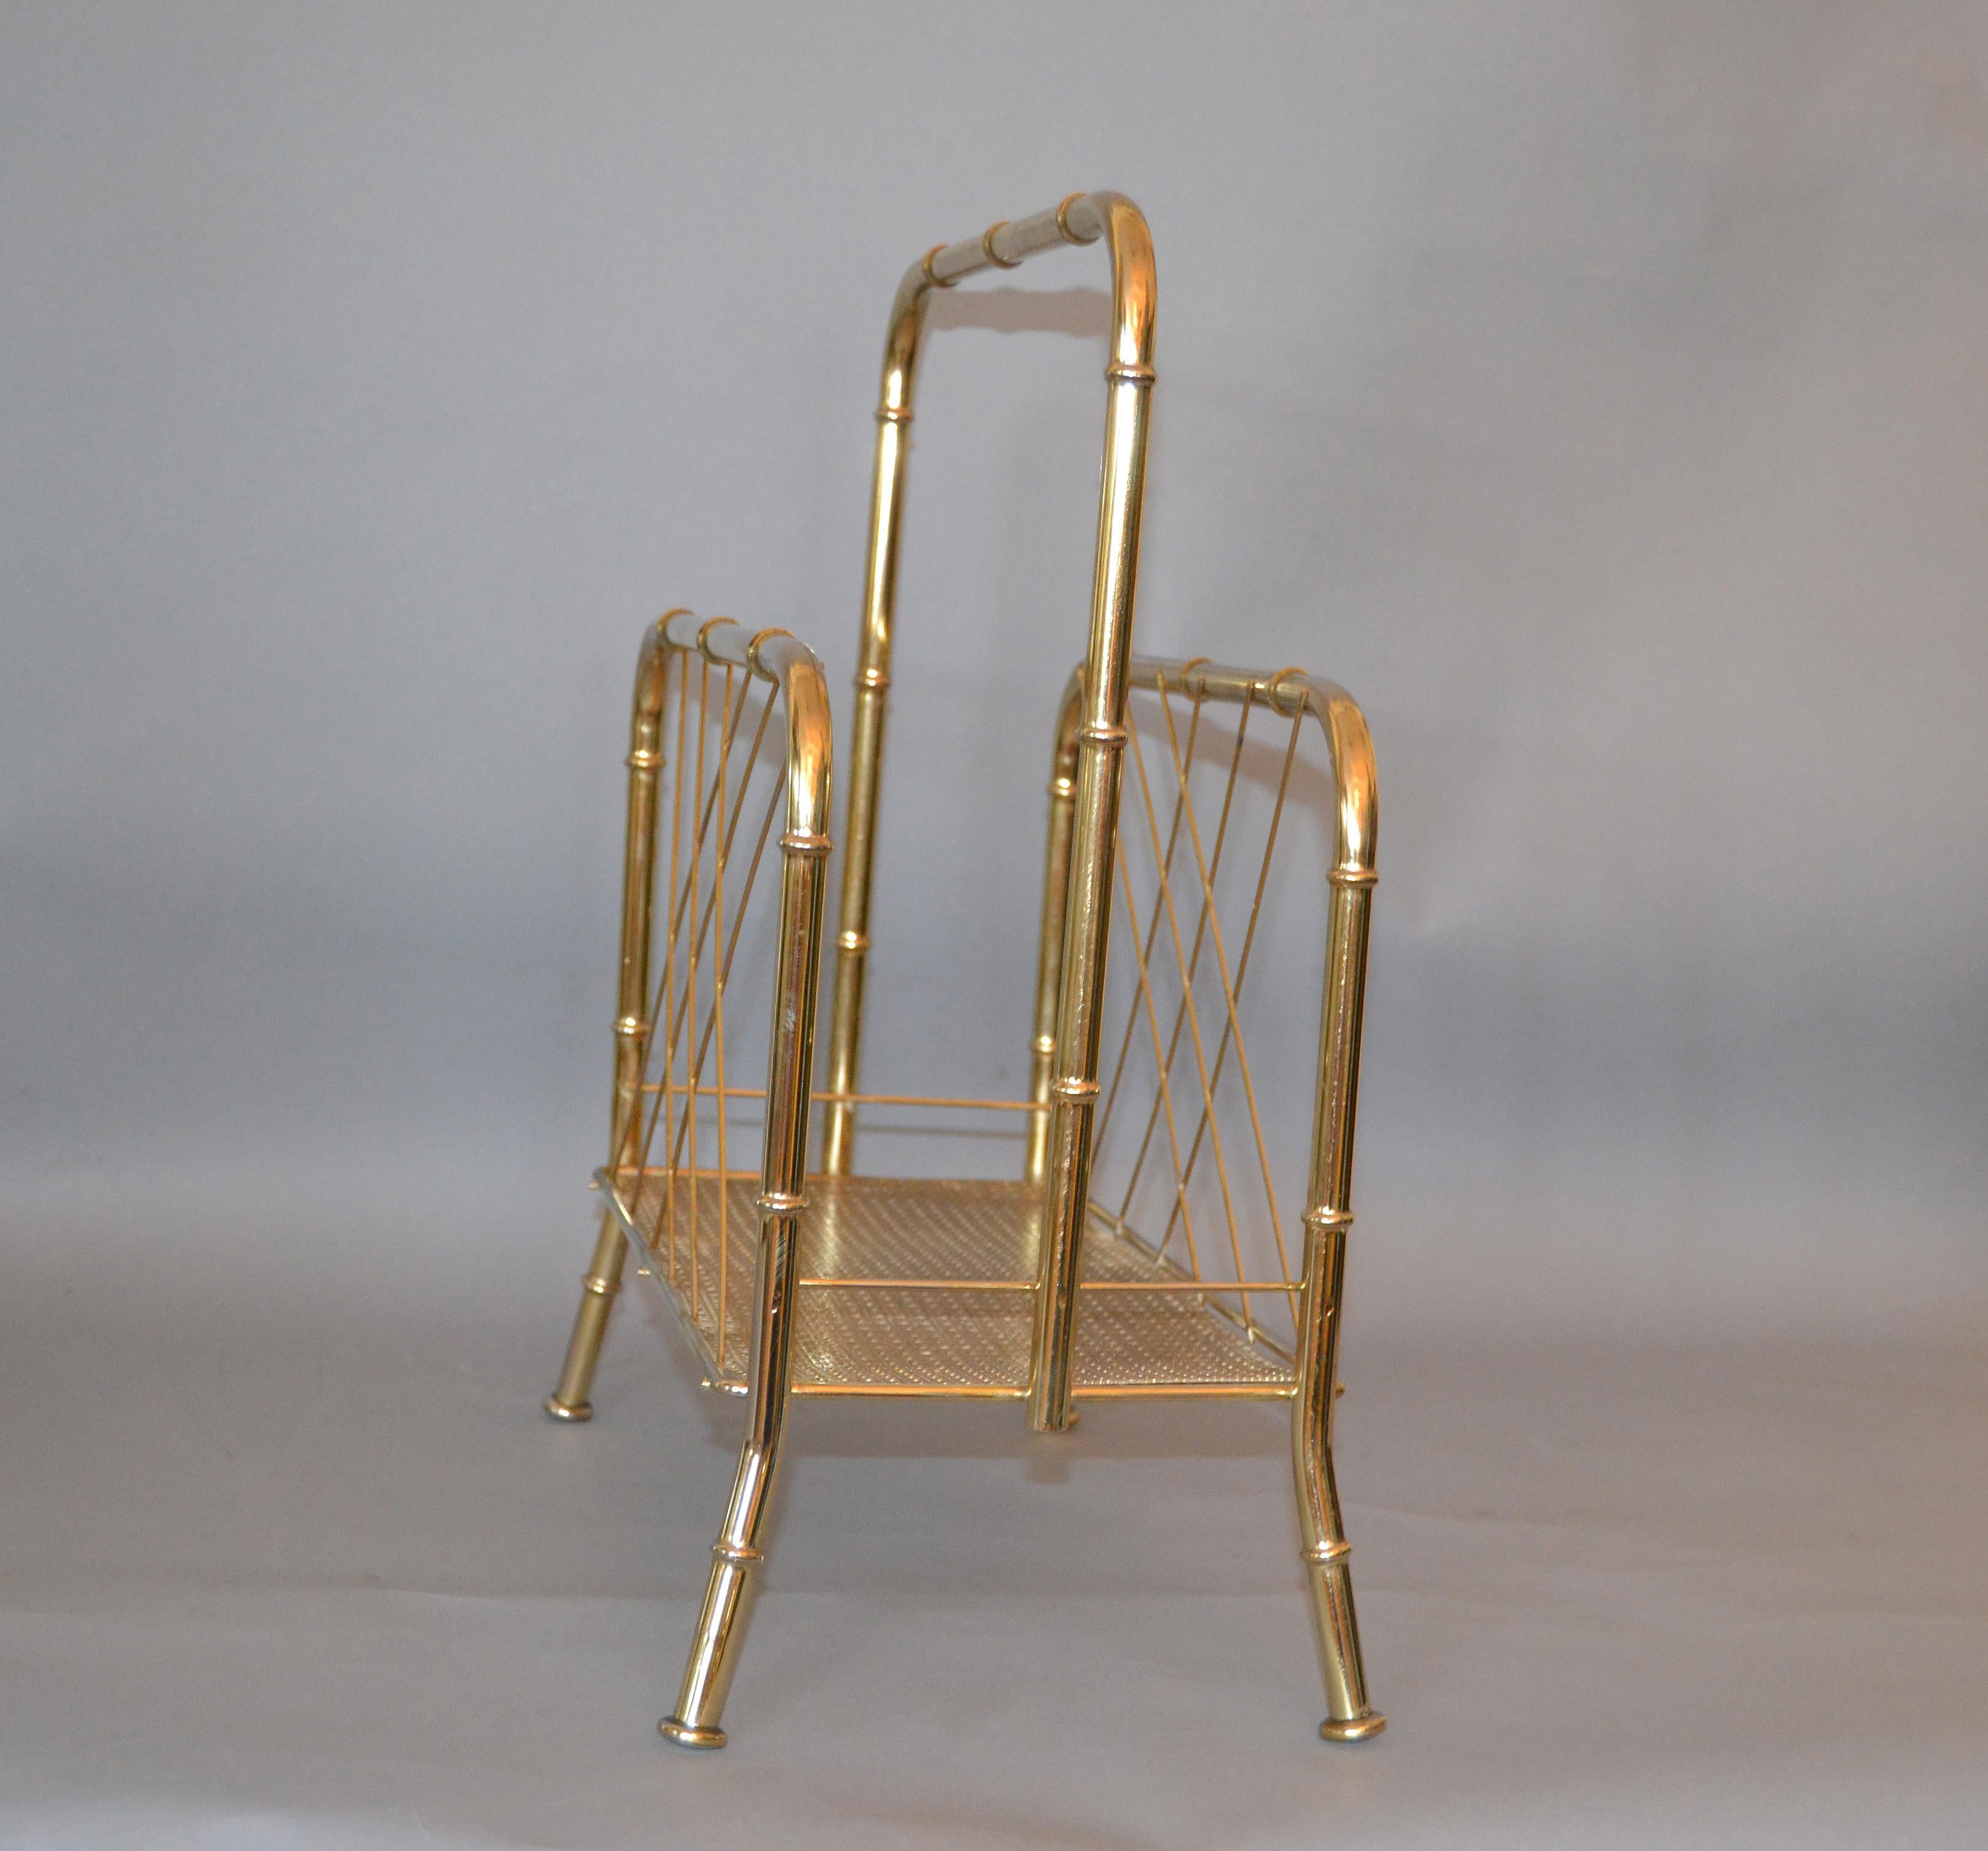 Hollywood Regency Brass Faux Bamboo and Cane Magazine Newspaper Stand Rack In Good Condition For Sale In Miami, FL